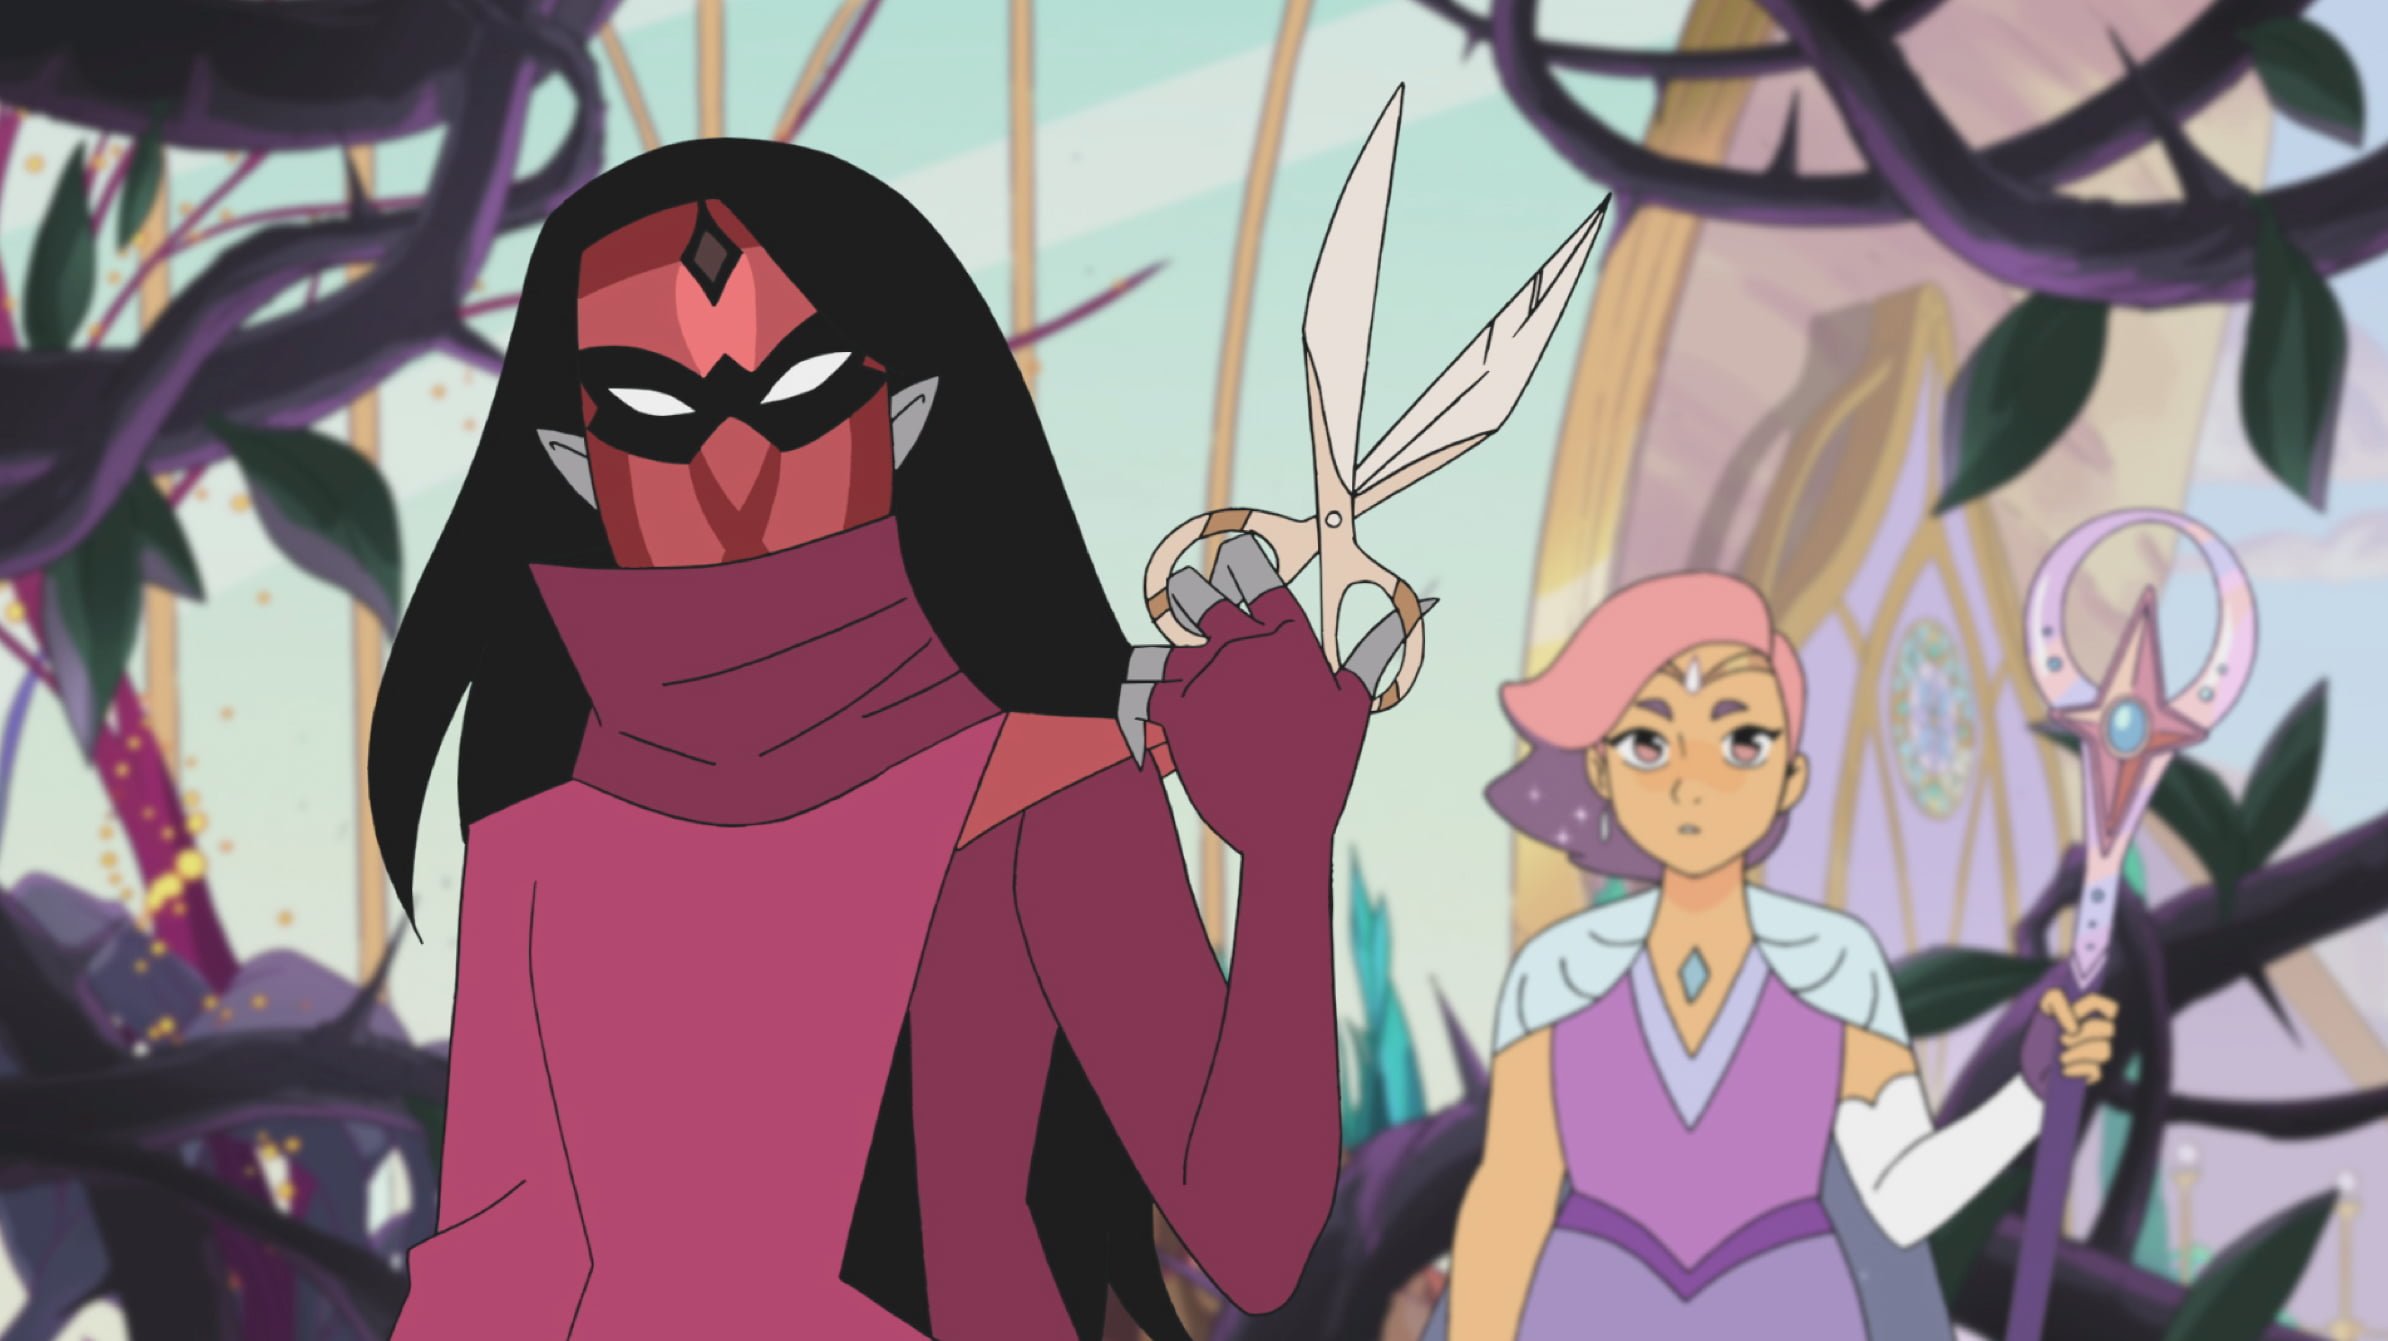 RELATED: Glimmer Grows Up In The Trailer For 'She-Ra And The Princesse...